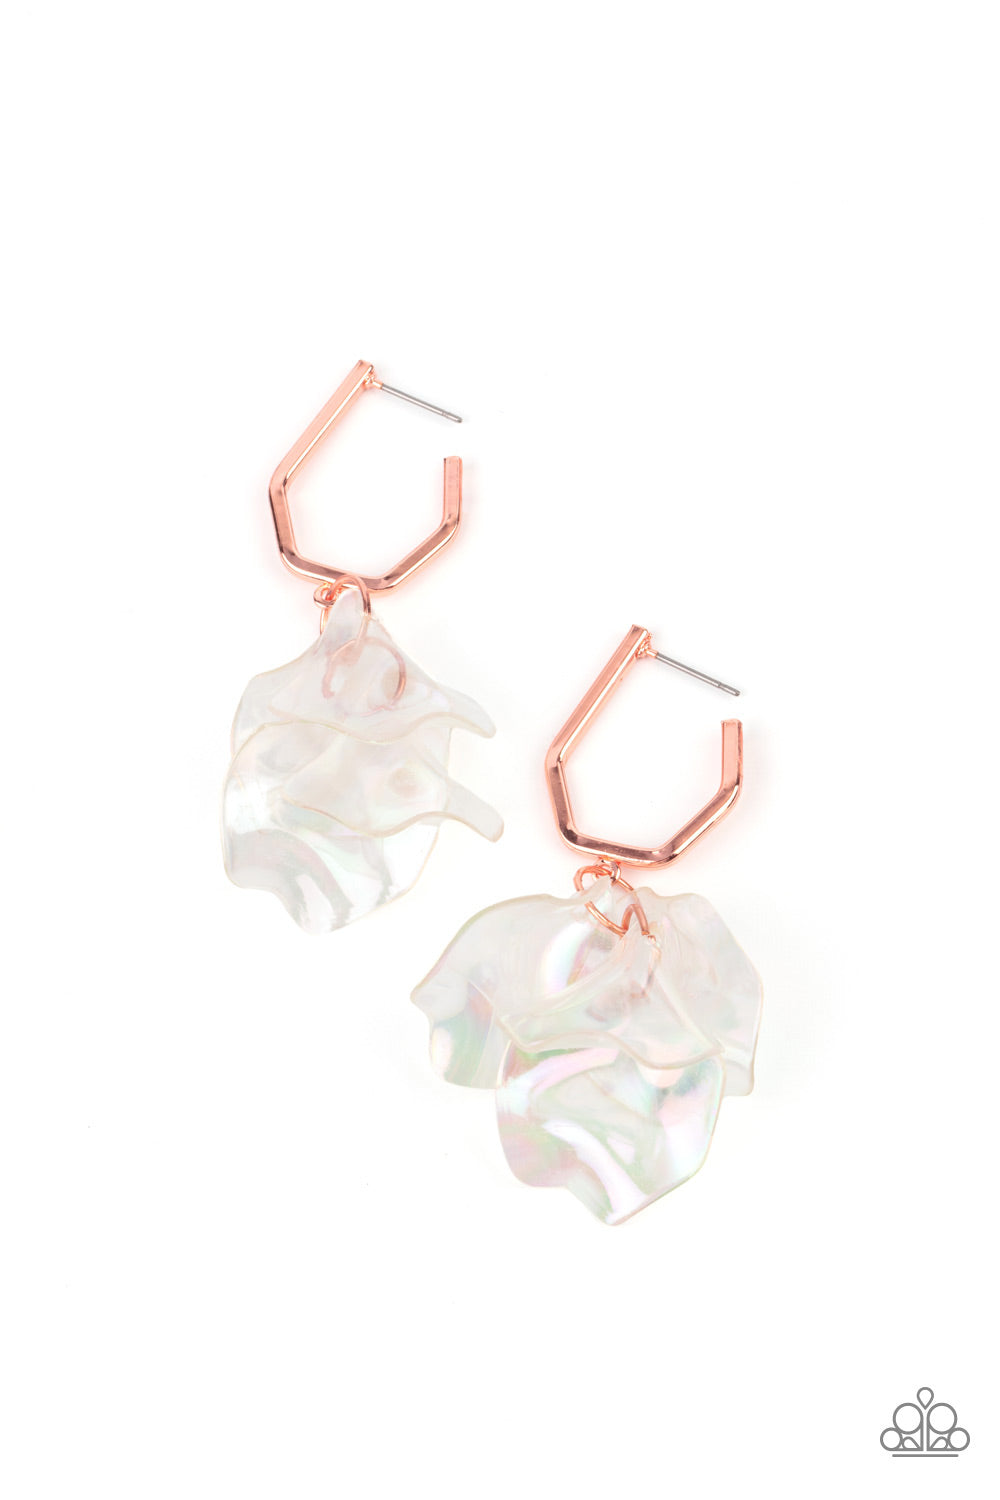 Jaw-Droppingly Jelly - Copper Iridescent Acrylic Earrings - Paparazzi Accessories